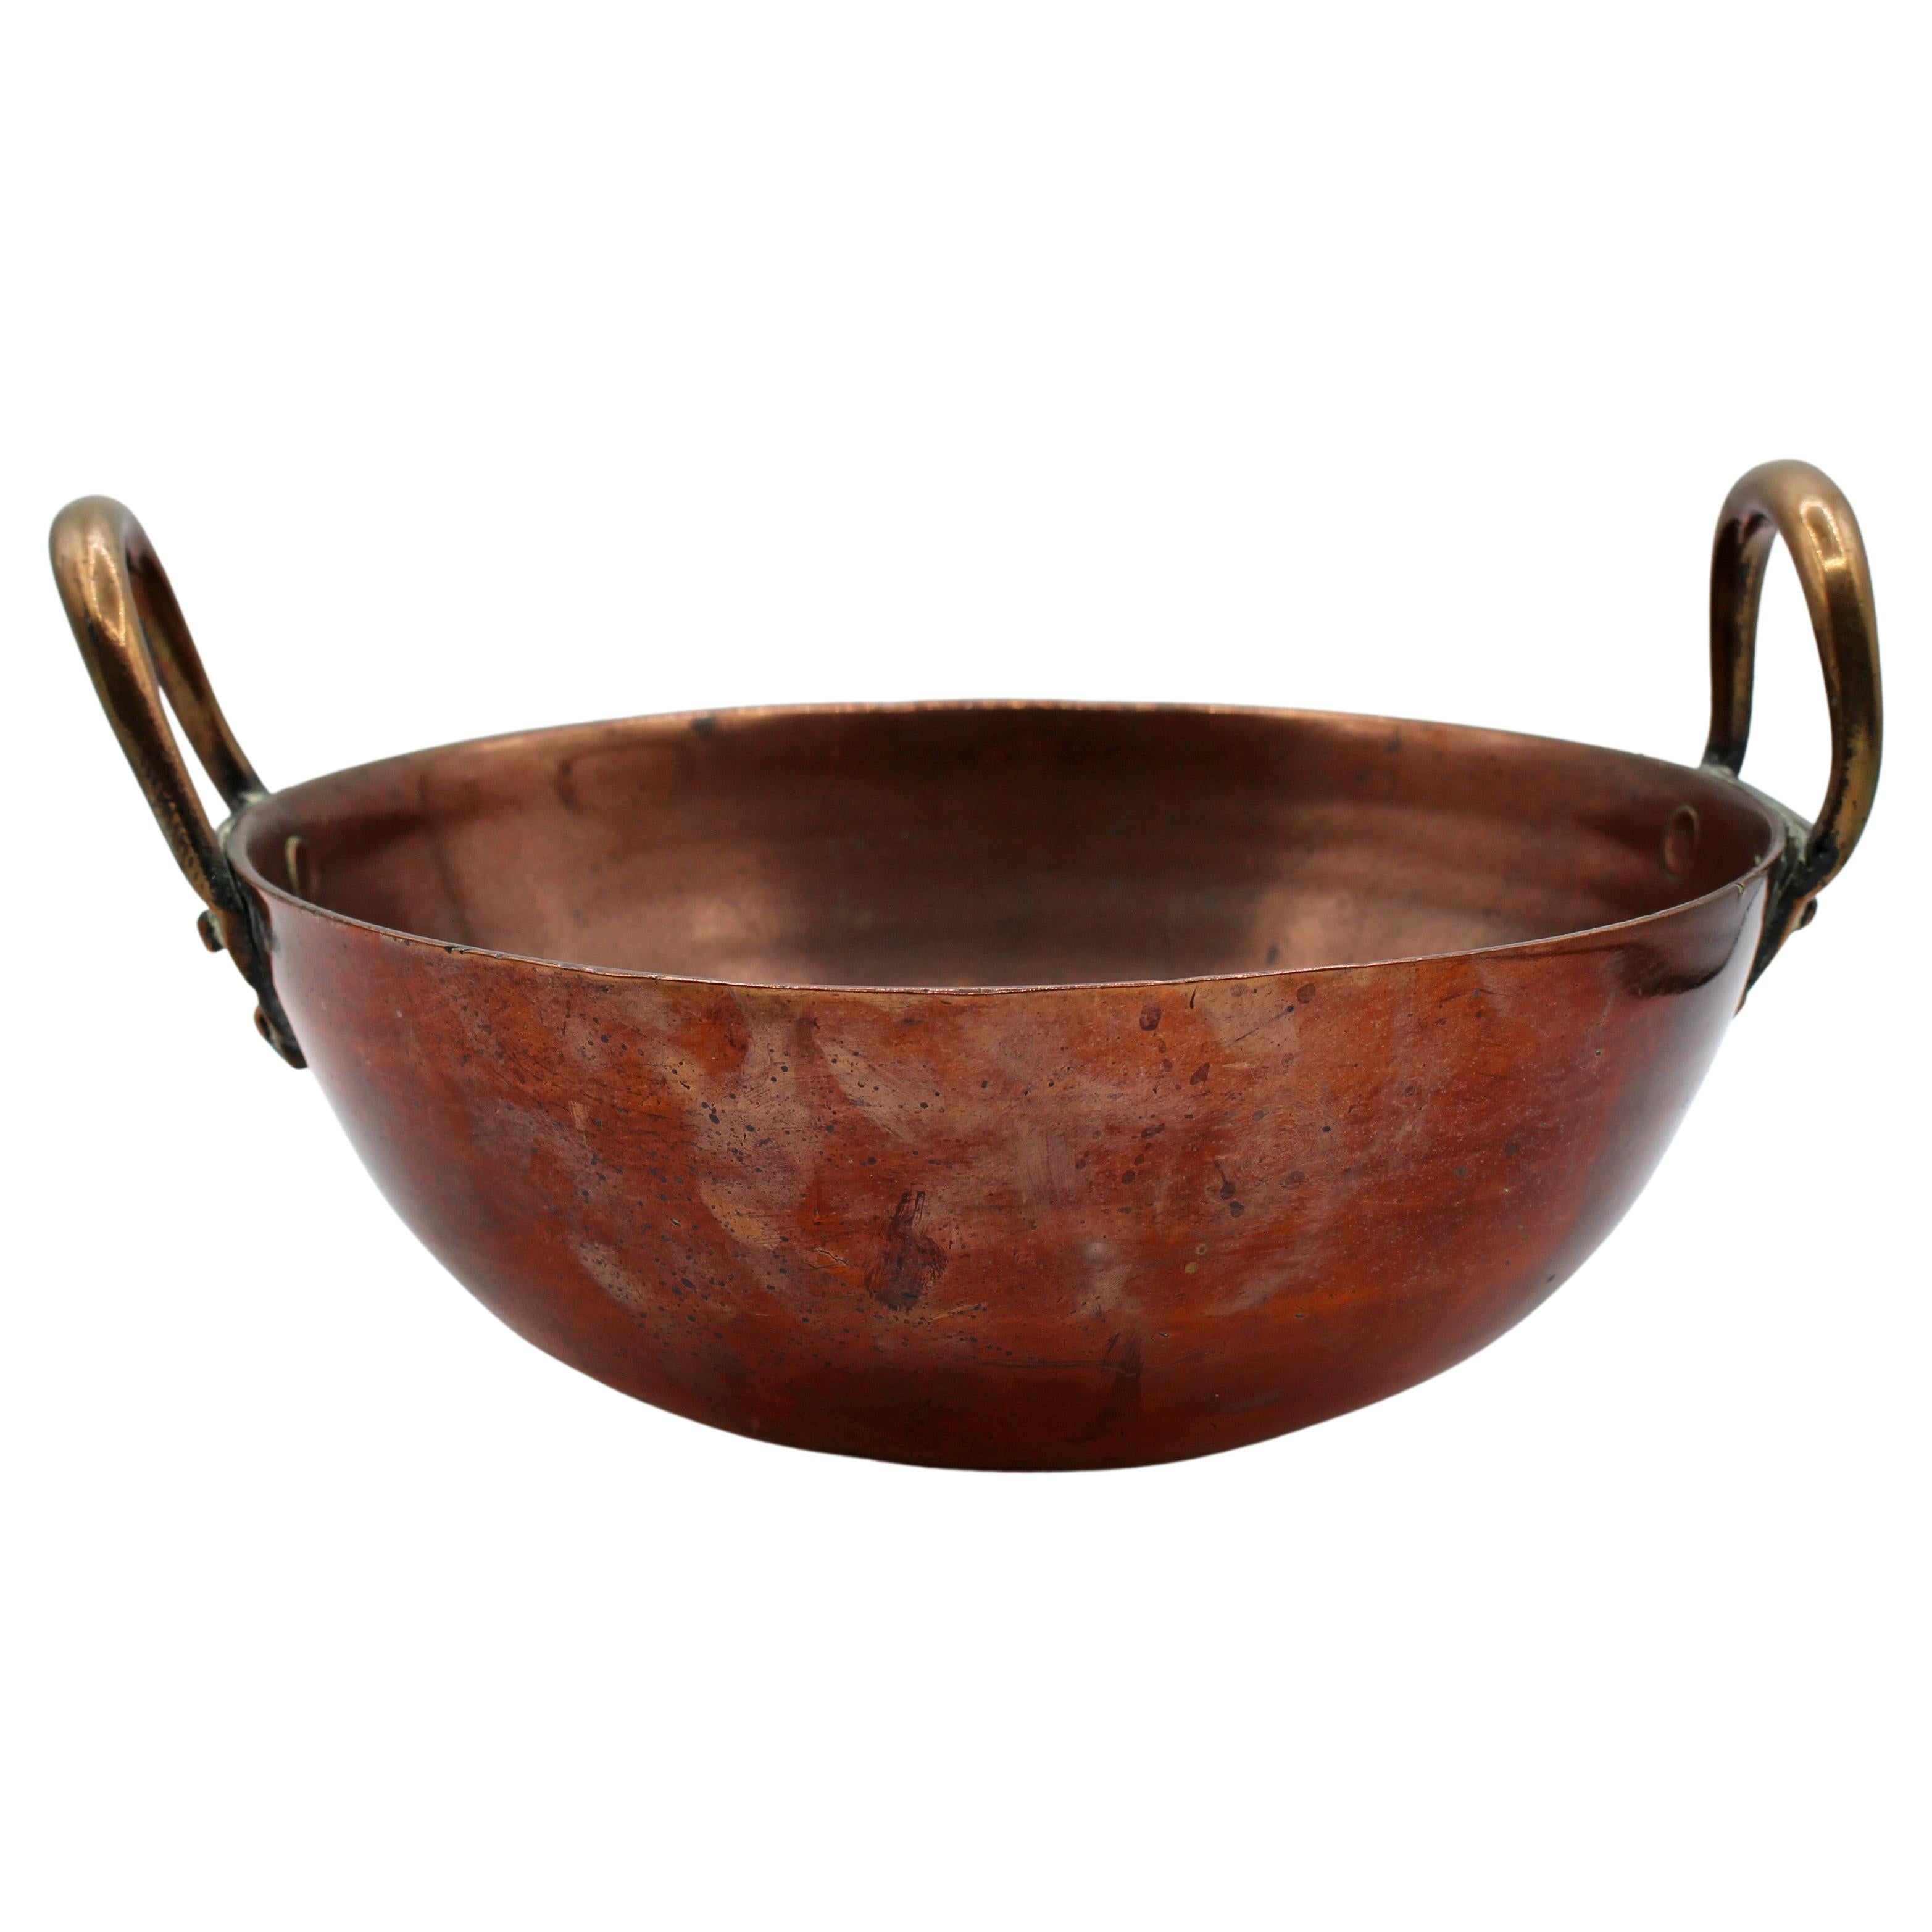 Mid-19th Century, Copper Mixing Bowl